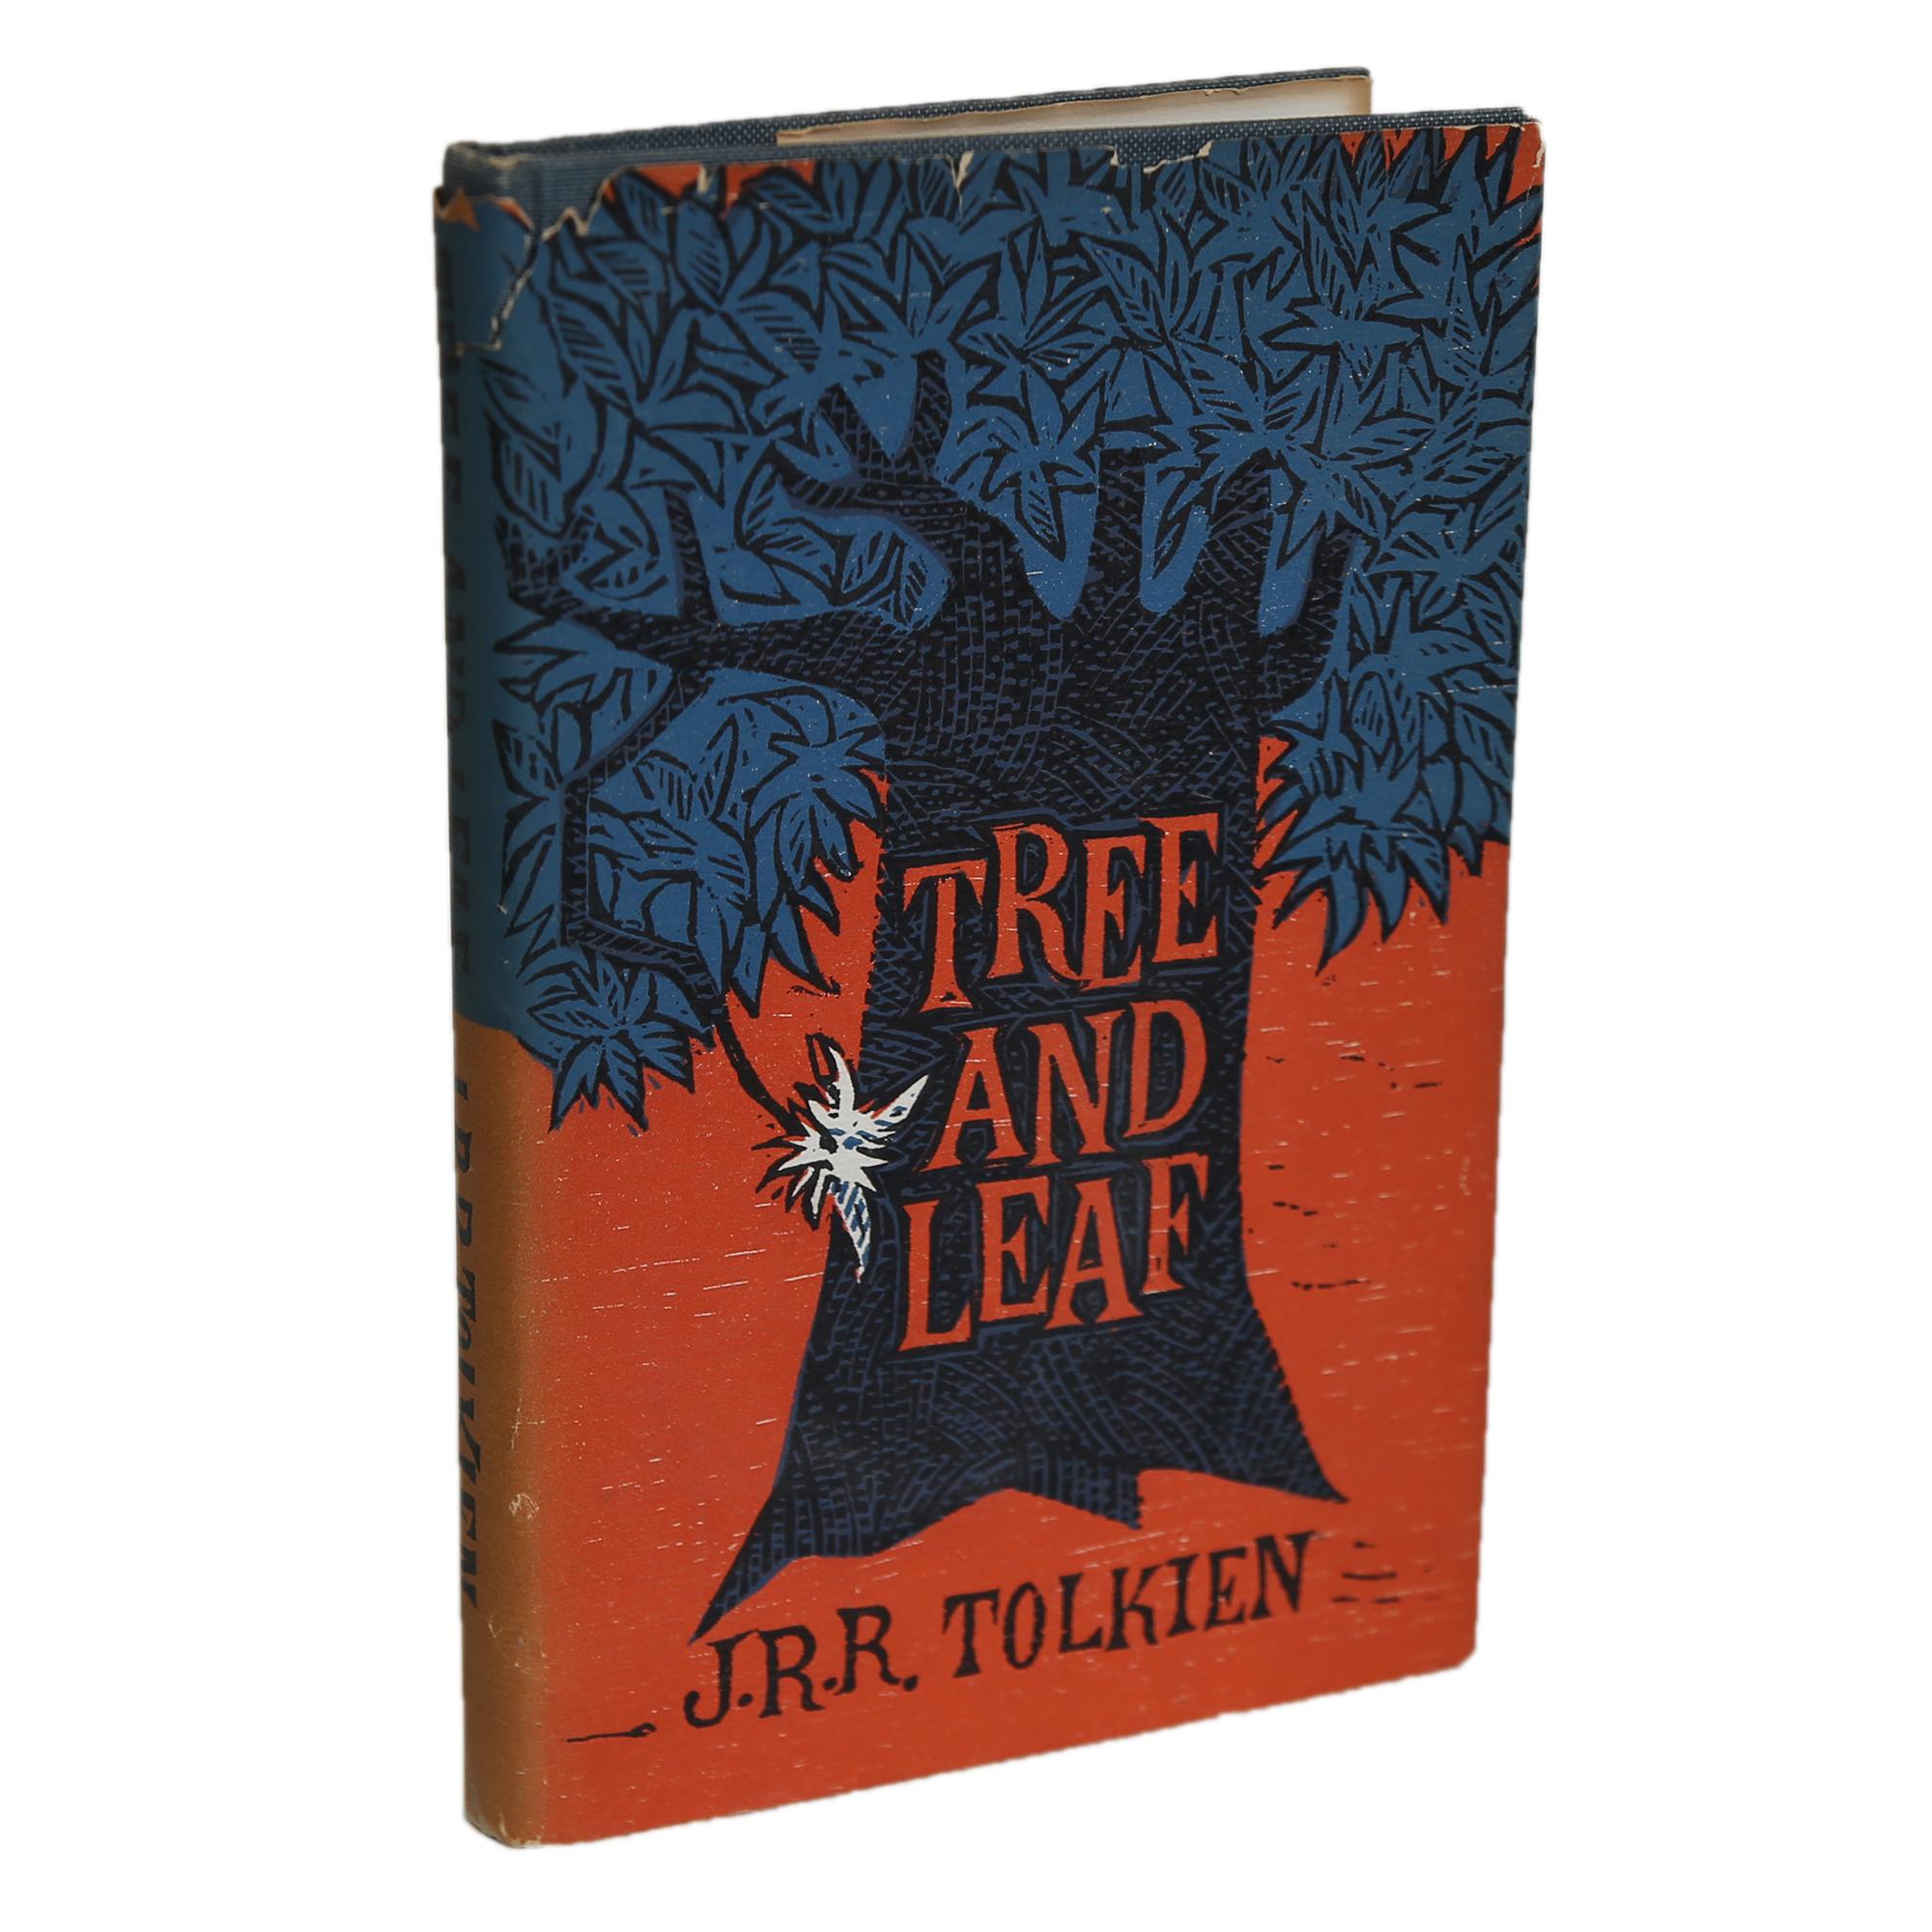 Tree and Leaf by J. R. R. Tolkien. Boston: Houghton Mifflin Company, 1965. First American Edition. Second Printing. 112 pages. Hardcover with dust jacket.

Tree and Leaf contains two works by J. R. R. Tolkien: a revised version of an essay called